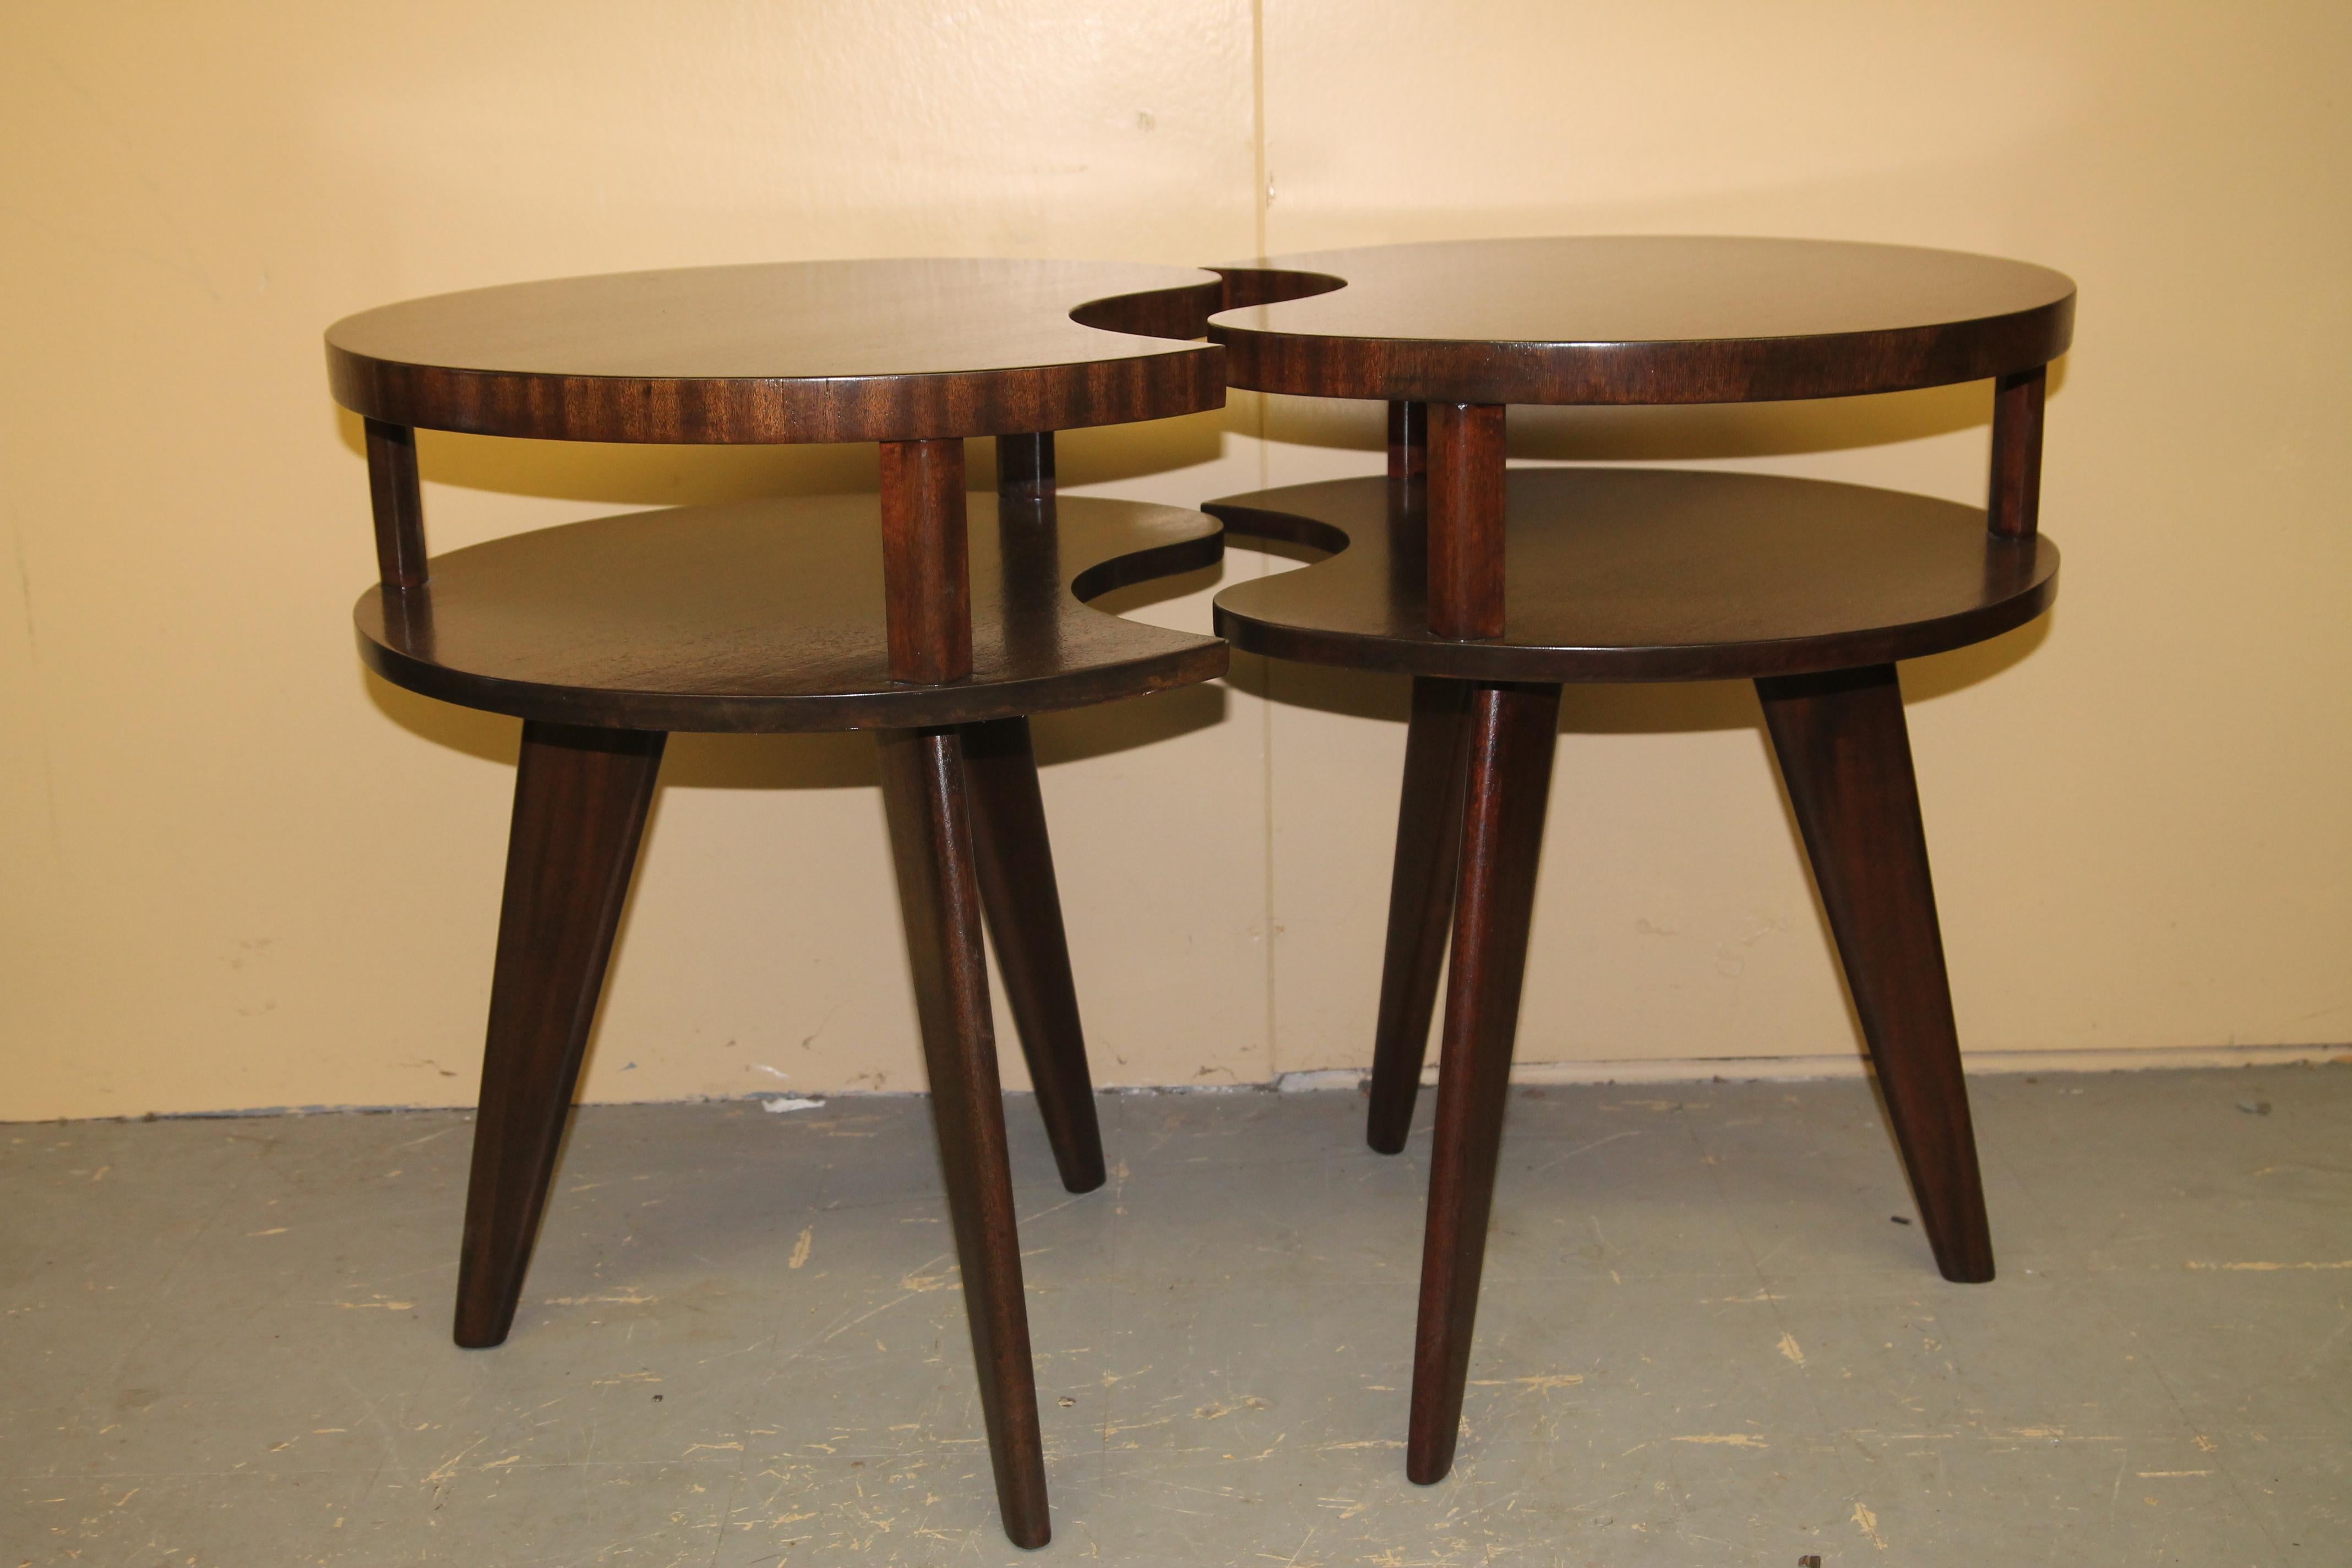 Great pair of side table. Have the feel of the furniture company Modern age but am unable to find an example of them. Most likely a custom pair by a skilled craftsmen. Have a deco look to them but believe they were made in the 1950s or 1960s.